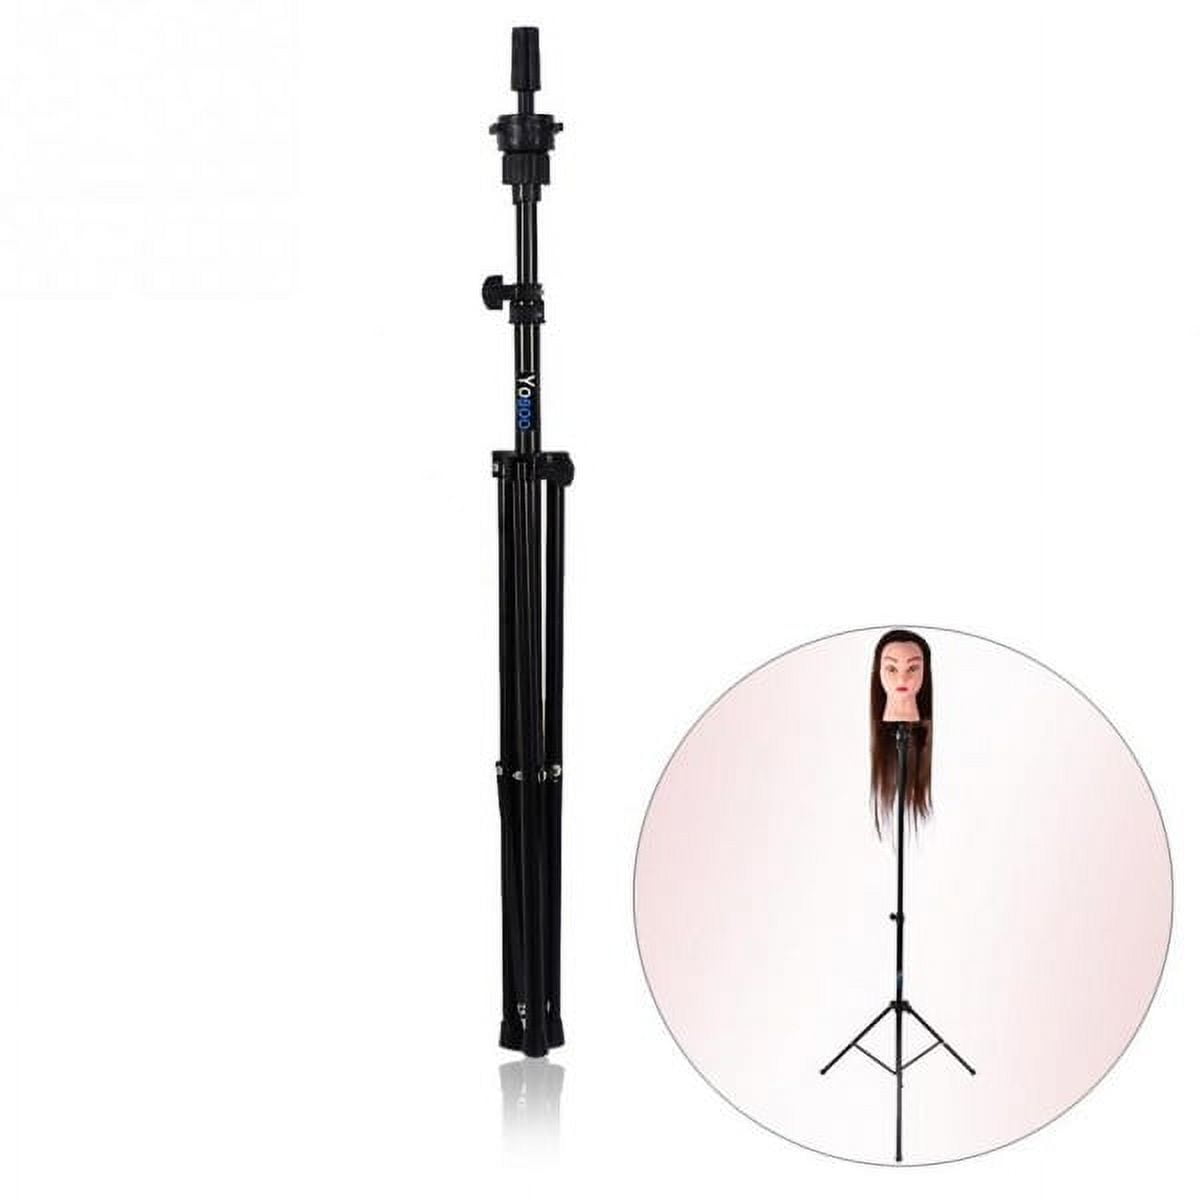 Wig Stand Tripod Mannequin Head Stand, Adjustable Wig Head Stand Holder for  Cosmetology Hairdressing Training with T-with Wig Caps, T-Pins, Comb, Hair  Clip, Carrying Bag 